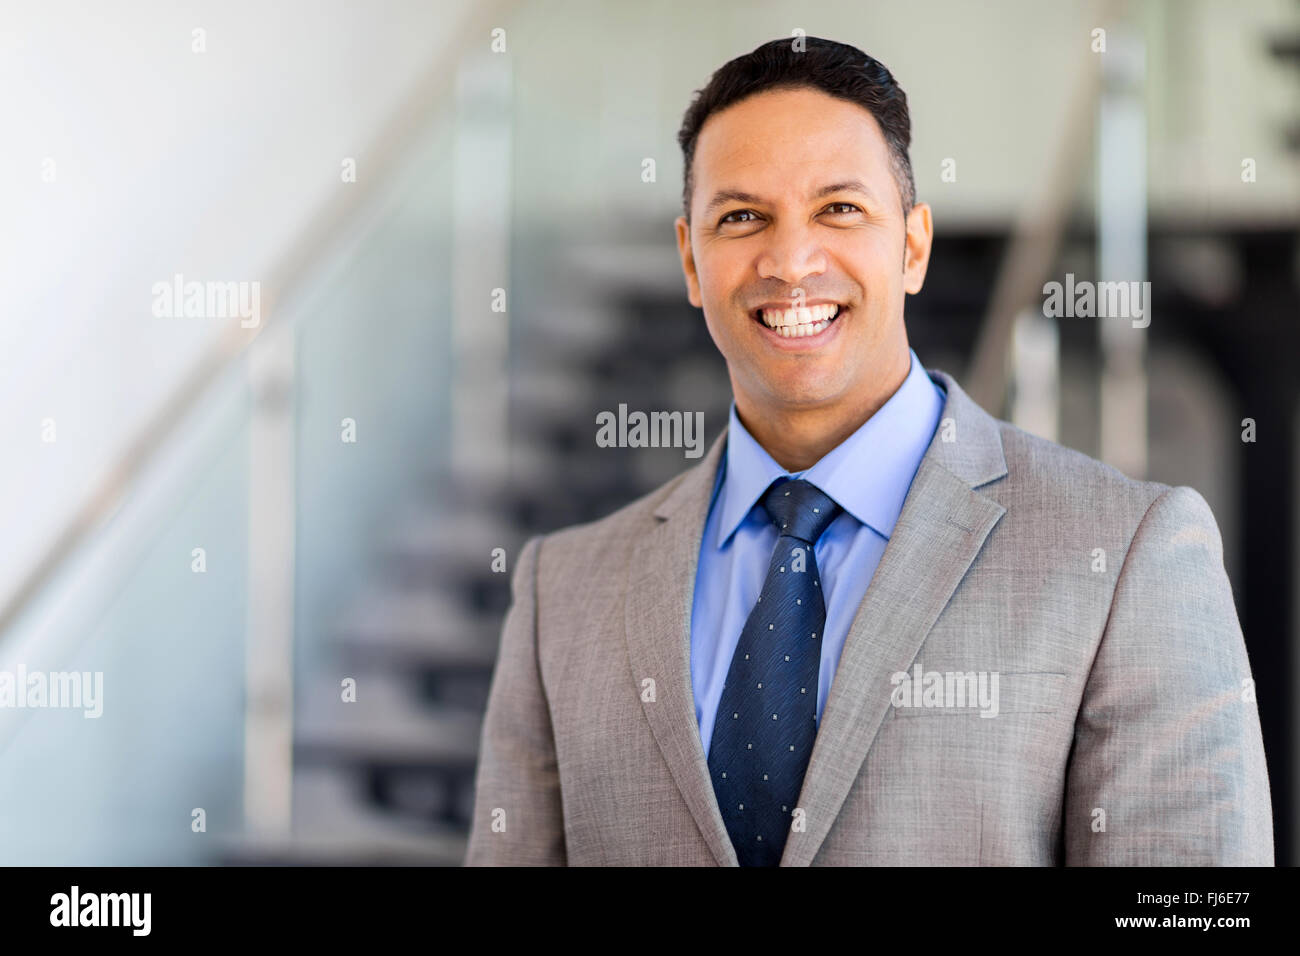 Cheerful businessman standing by stairway Banque D'Images